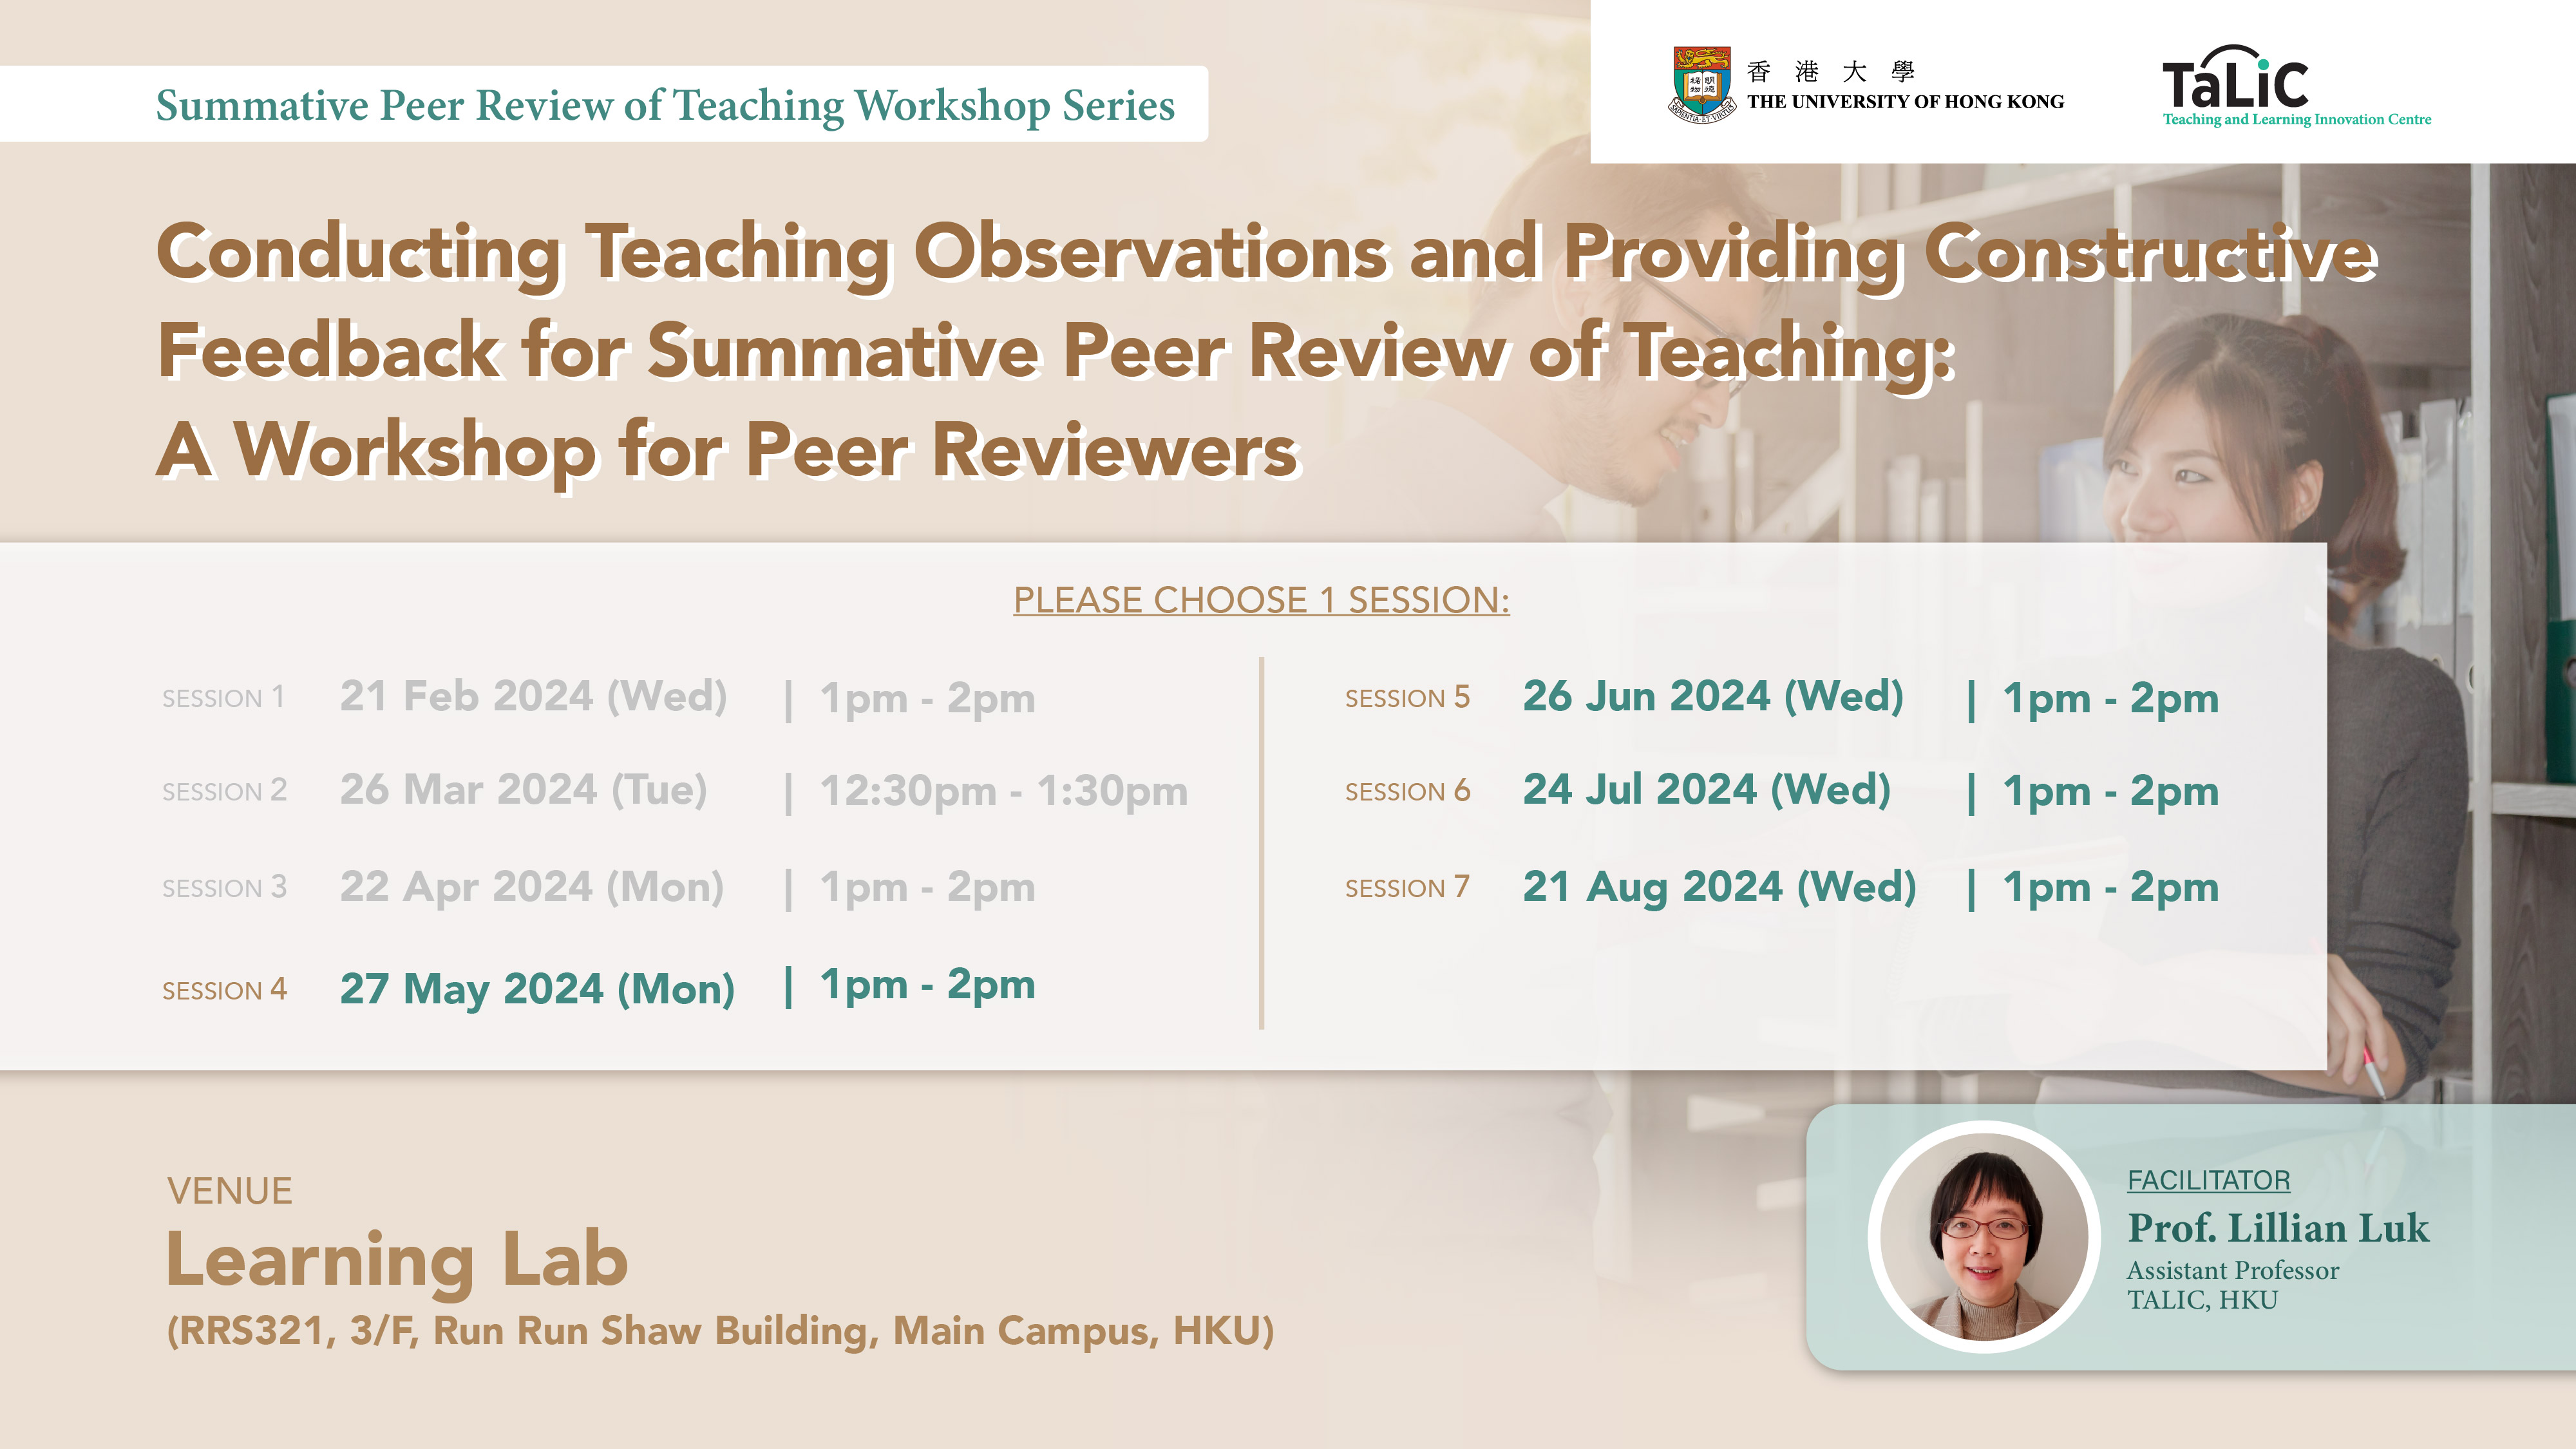 Conducting Teaching Observations and Providing Constructive Feedback for Summative Peer Review of Teaching: A Workshop for Peer Reviewers